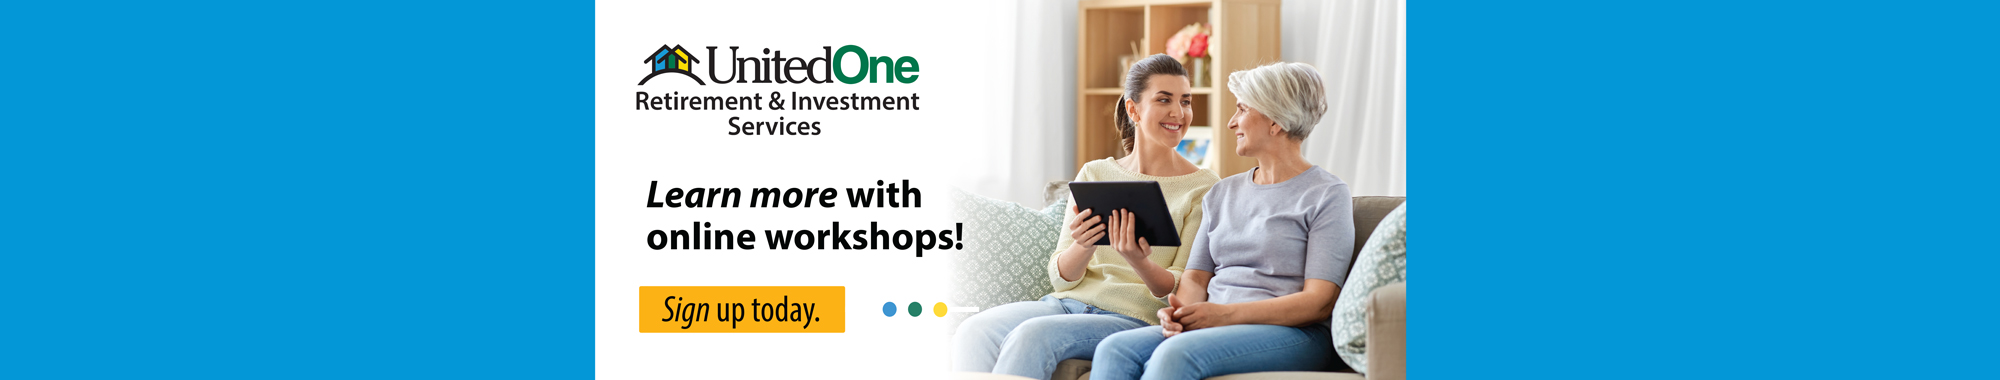 UnitedOne Retirement & Investment Services. Learn more with online workshops! Sign up today.